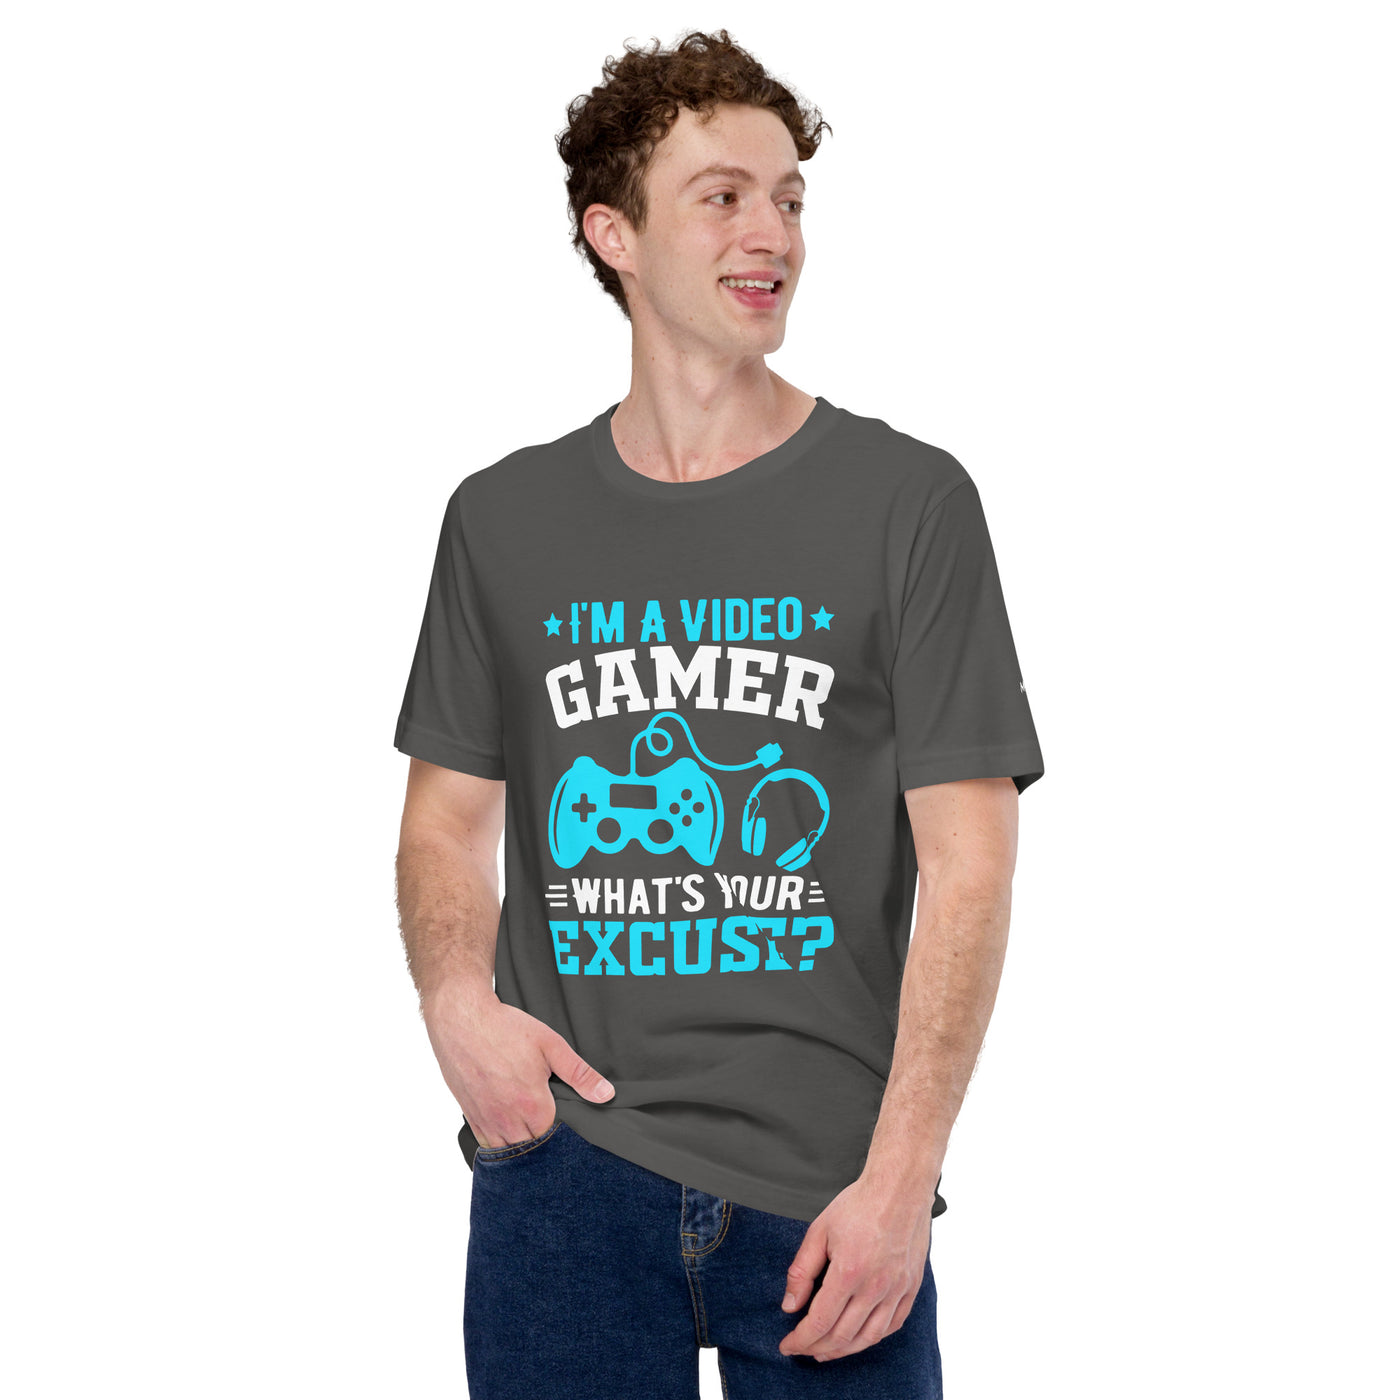 I am a Video Gamer! What is Your Excuse? Unisex t-shirt